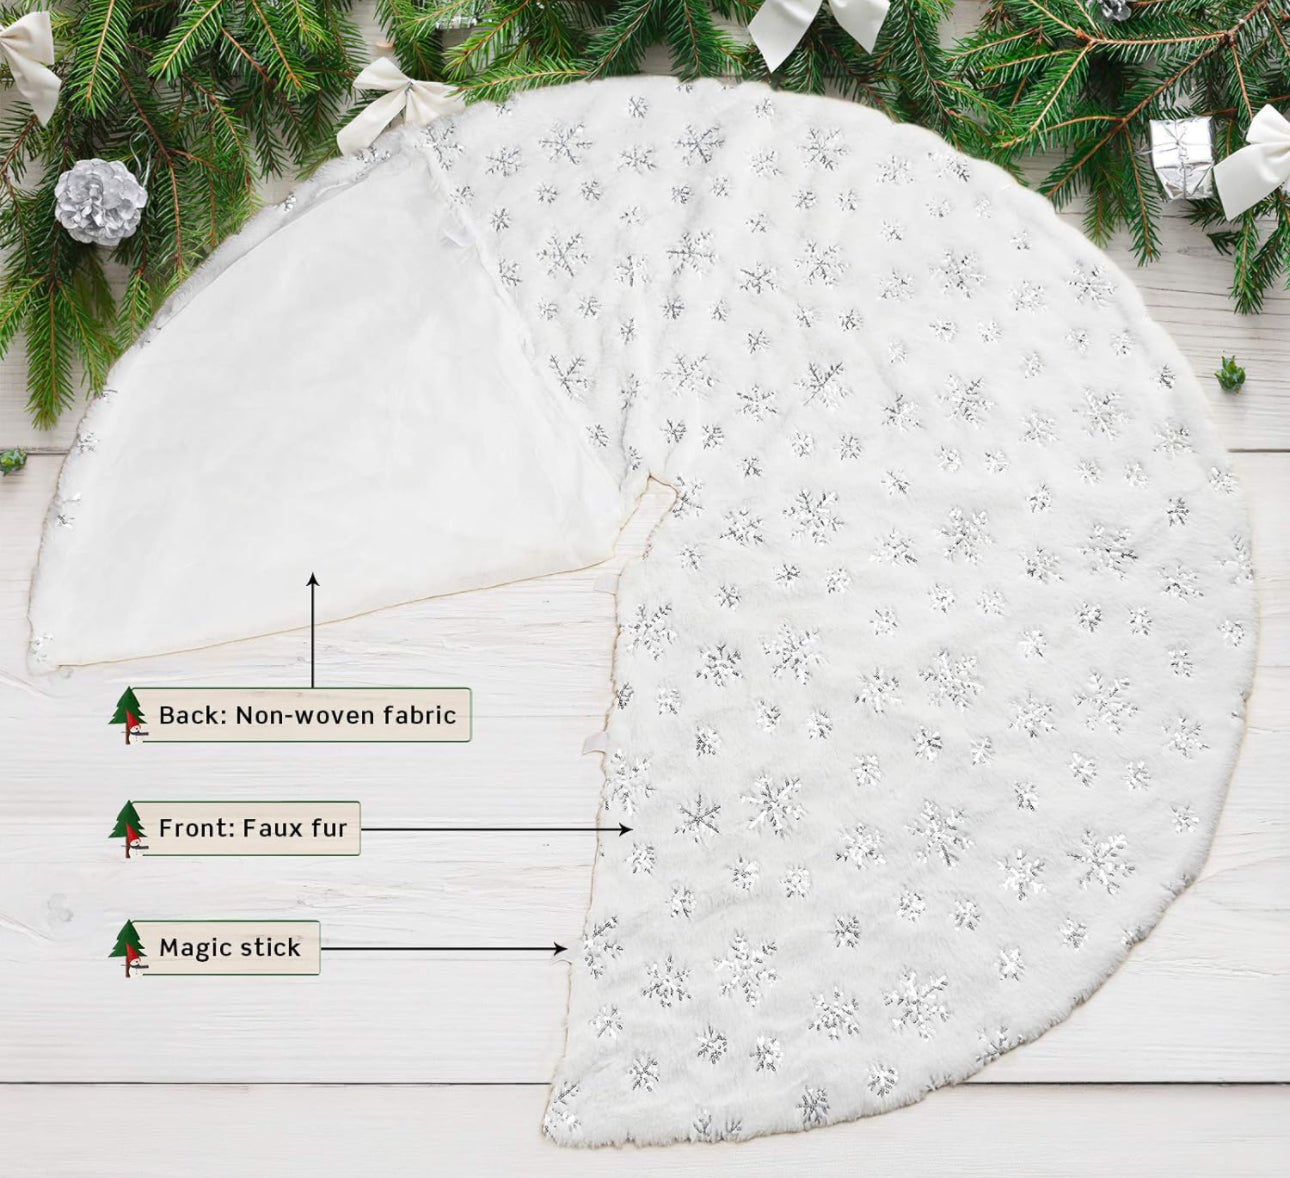 COOLWUFAN 48 Inches Christmas Tree Skirt for Xmas Tree Holiday Party Decorations White Plush Silver Sequin Snowflake (Silver)